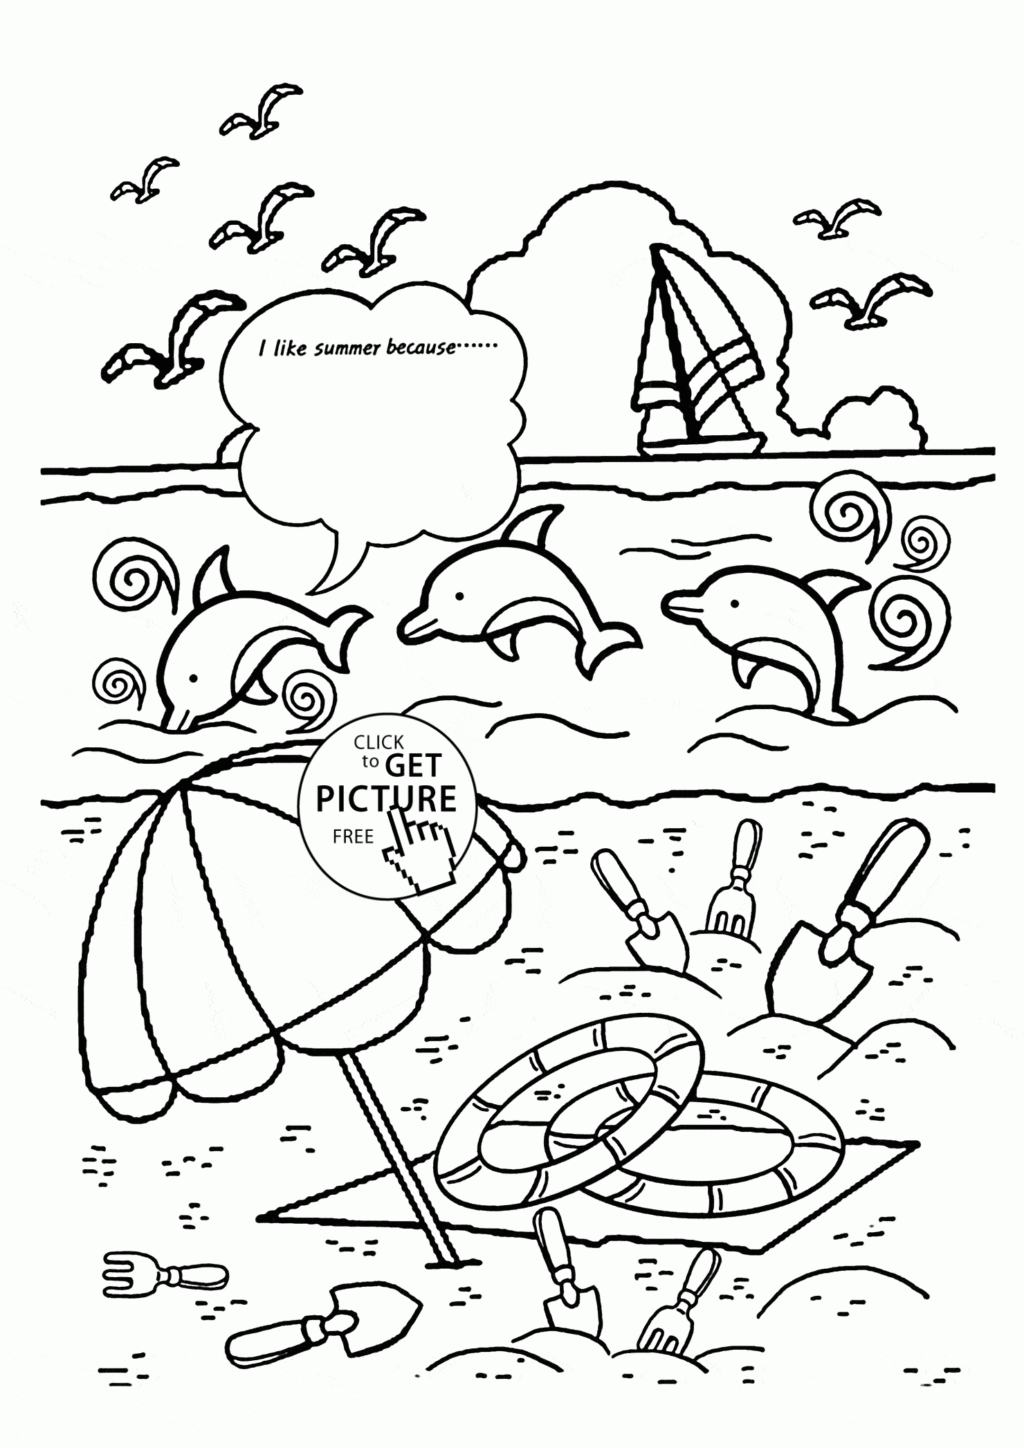 Coloring Pages Online To Print Coloring Books Free Coloring Sheets For Kids To Print Out